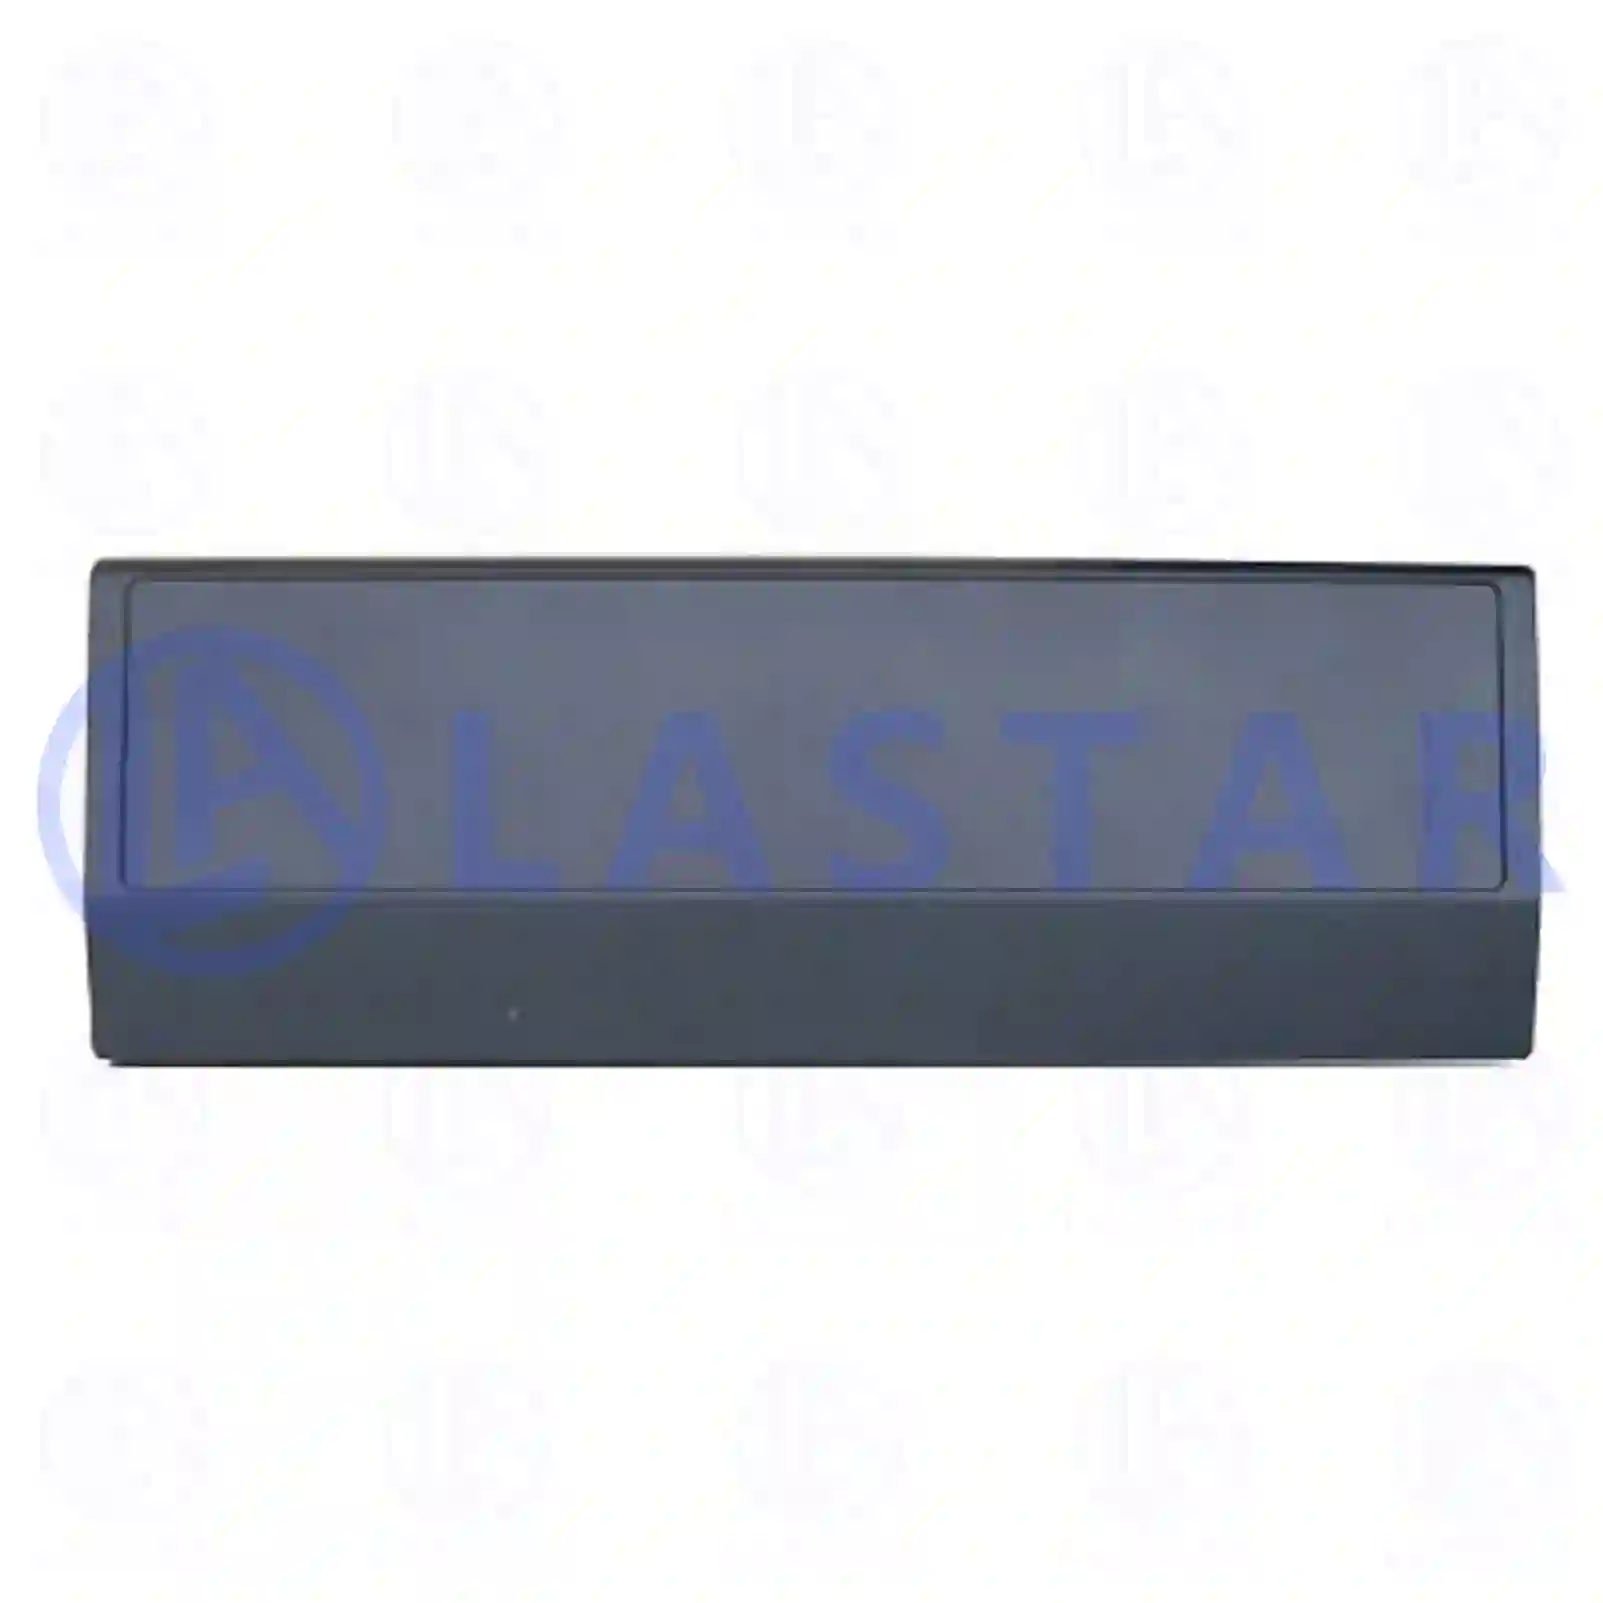 License plate holder, 77720519, 02997152, 08143032, 2997152, 8143032 ||  77720519 Lastar Spare Part | Truck Spare Parts, Auotomotive Spare Parts License plate holder, 77720519, 02997152, 08143032, 2997152, 8143032 ||  77720519 Lastar Spare Part | Truck Spare Parts, Auotomotive Spare Parts